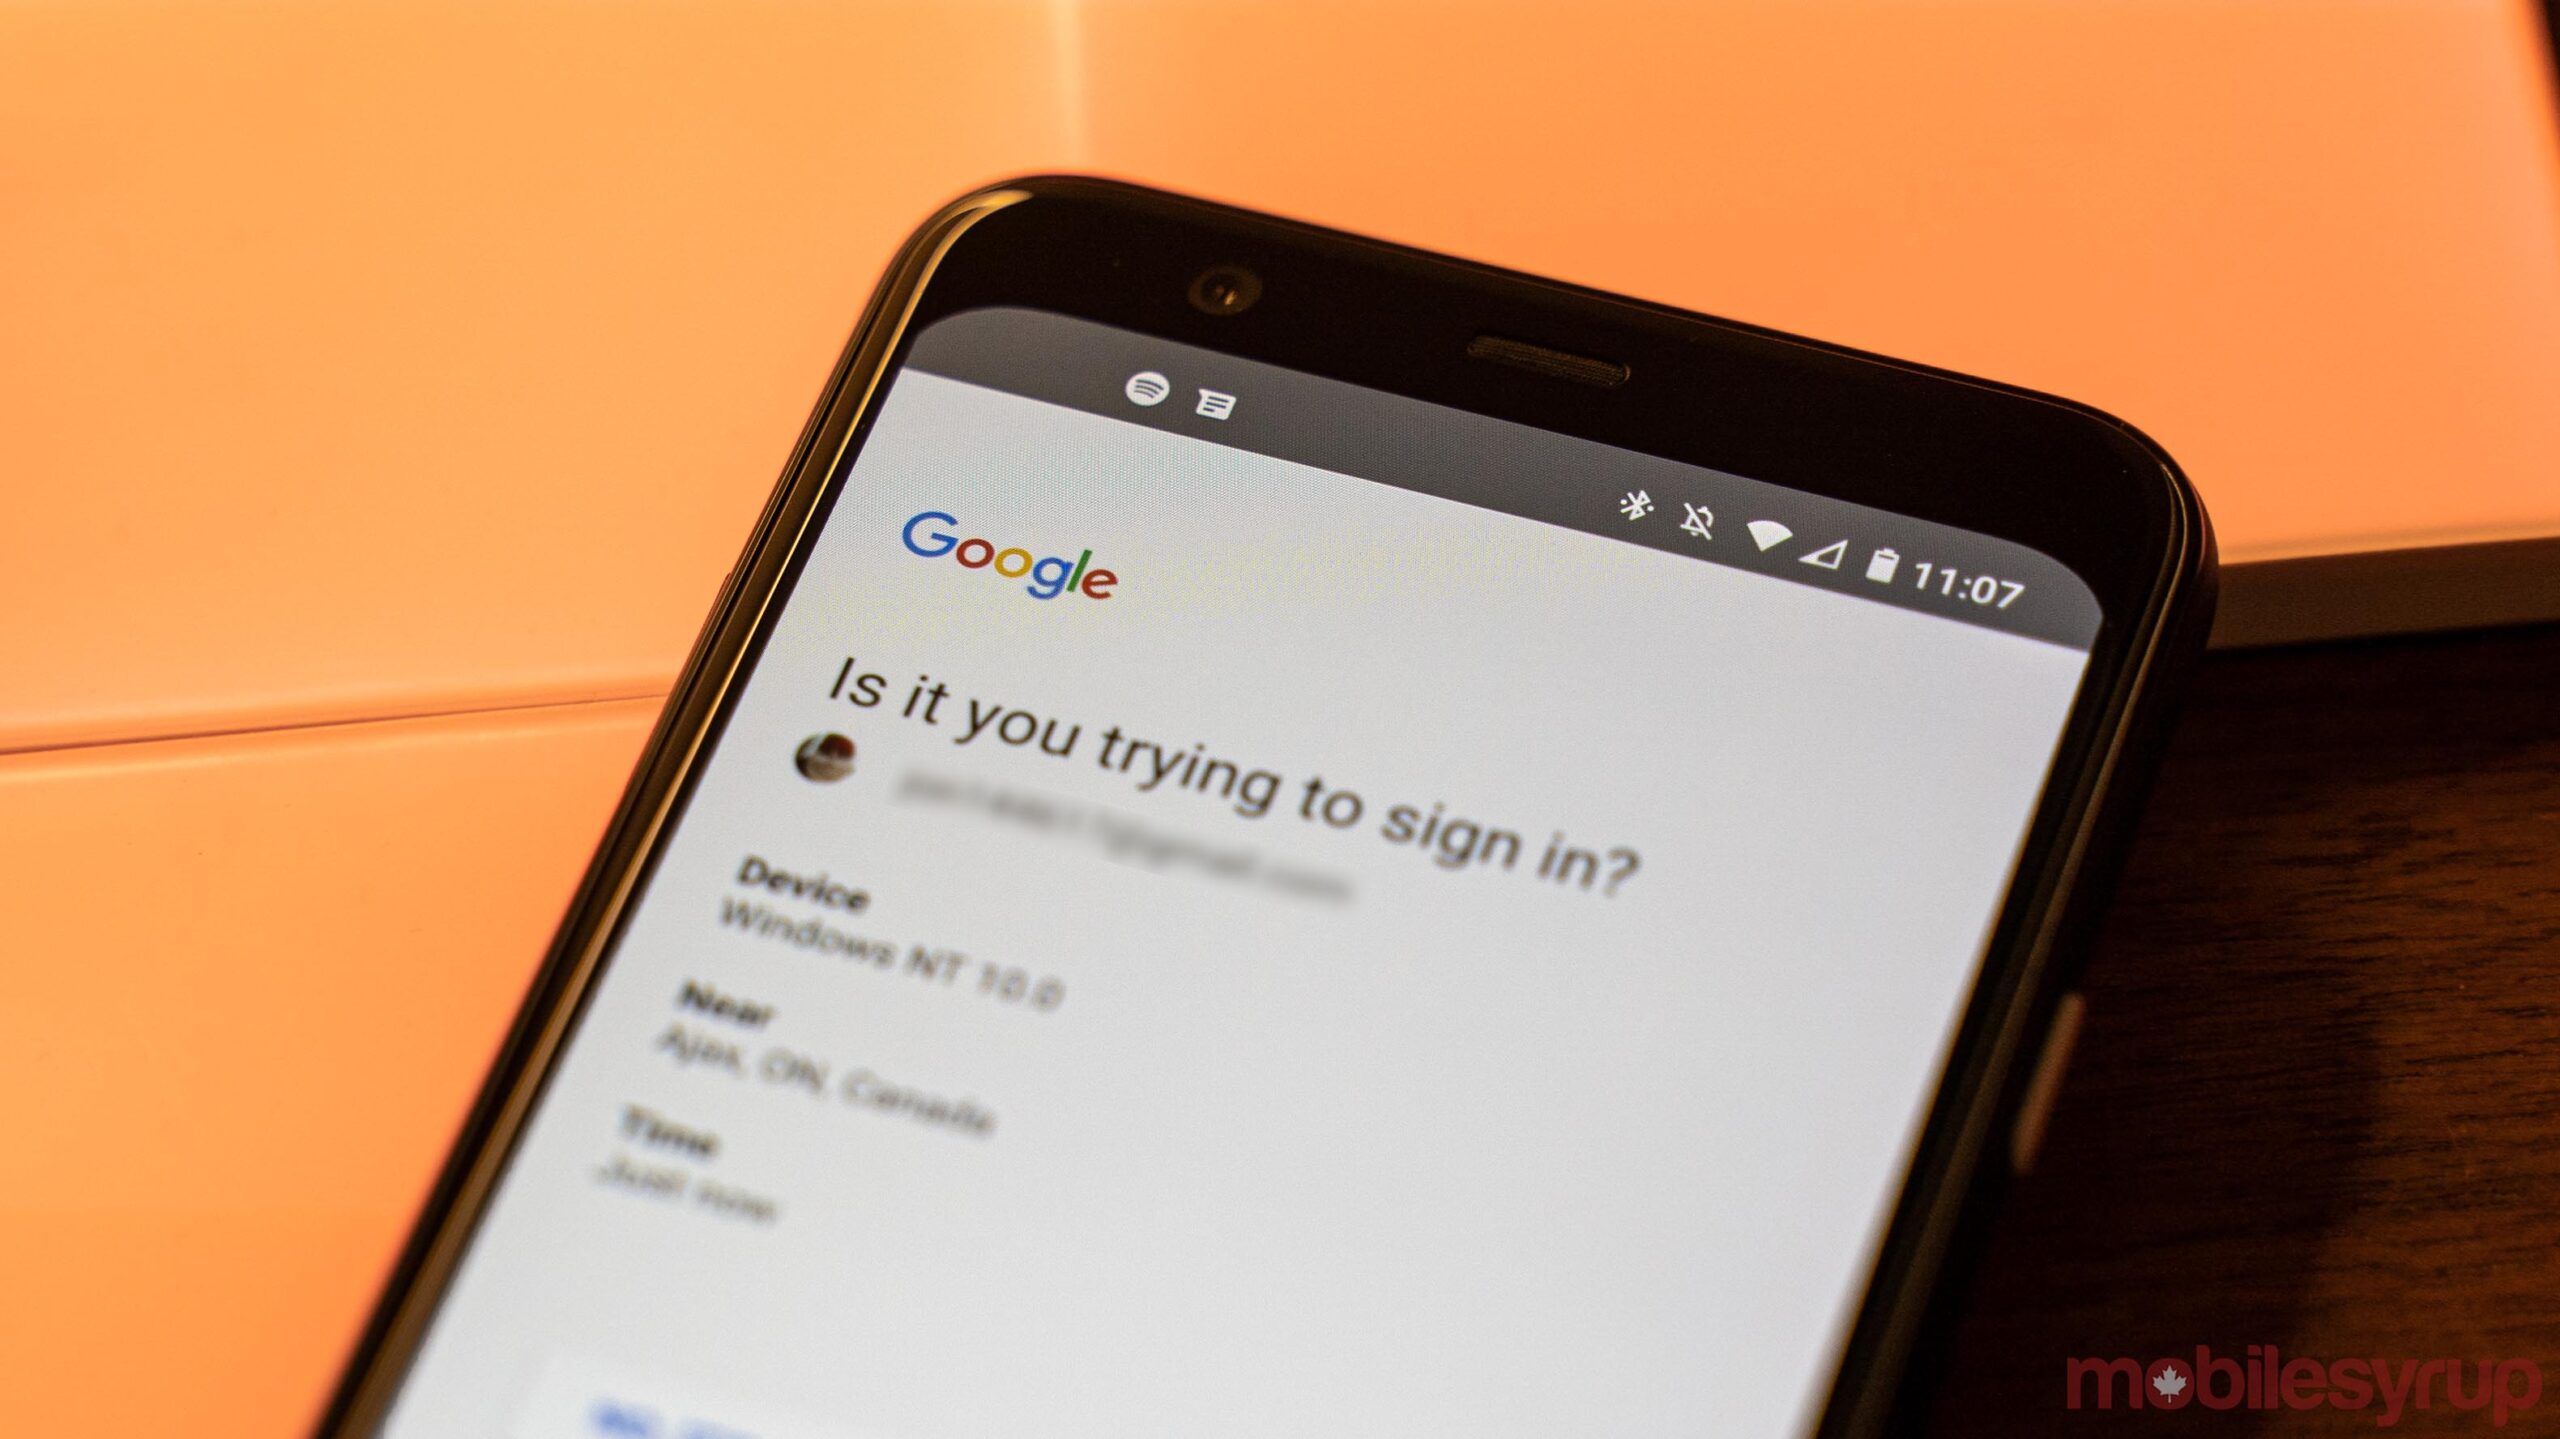 Google Will Start Pushing Sign In Prompts To All Signed In Devices